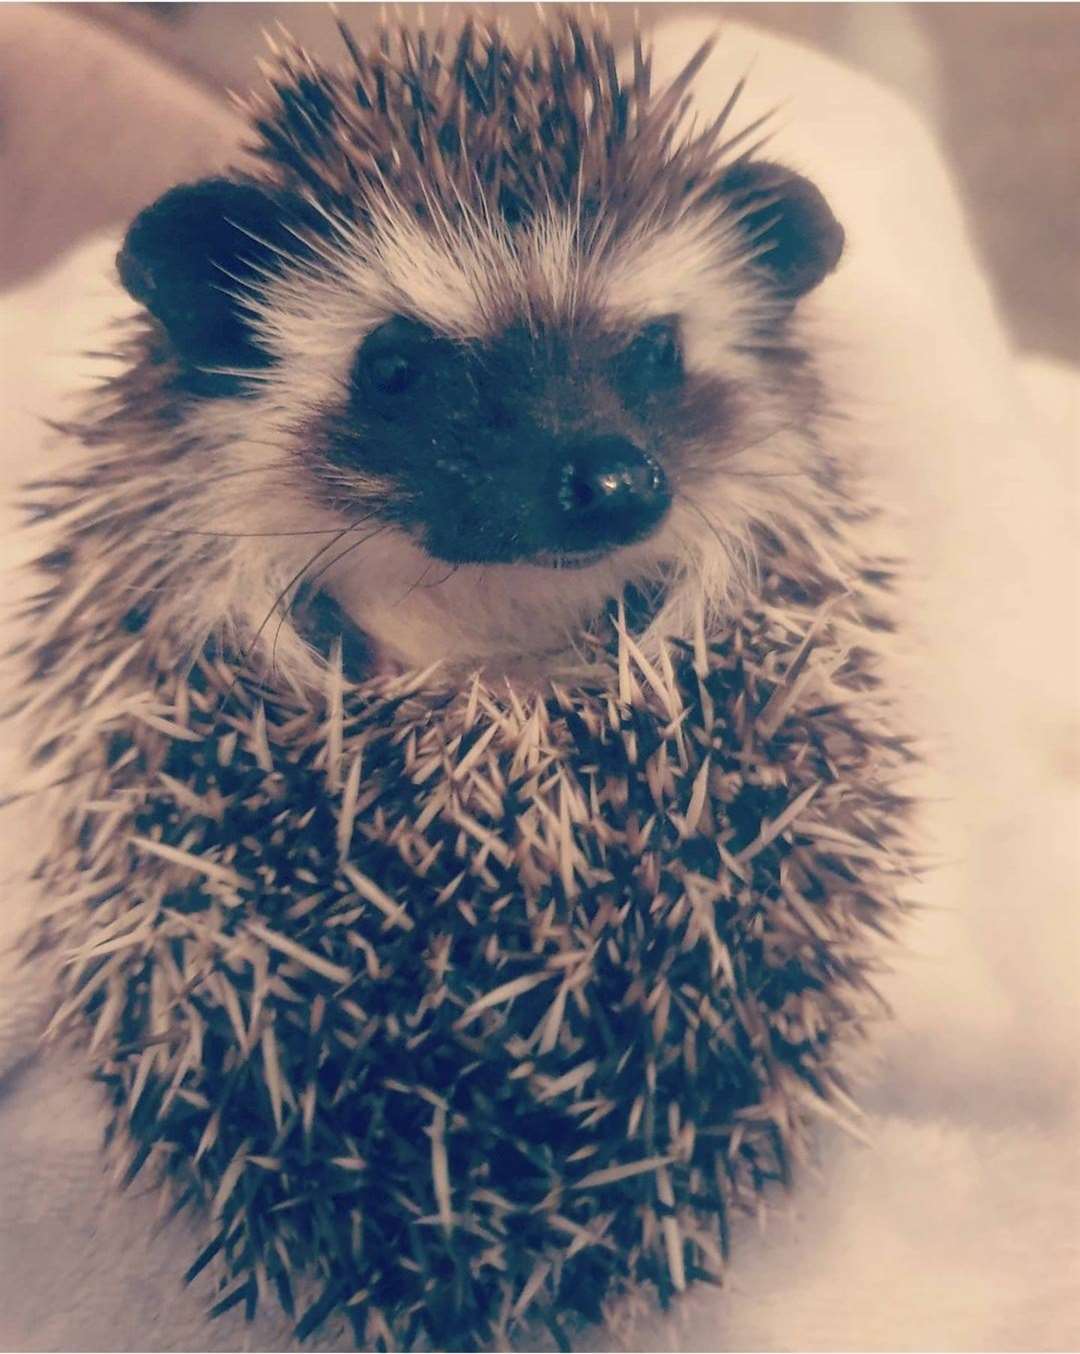 Although he is a ball of prickles Sir Quilliam is also very loving and snuggly